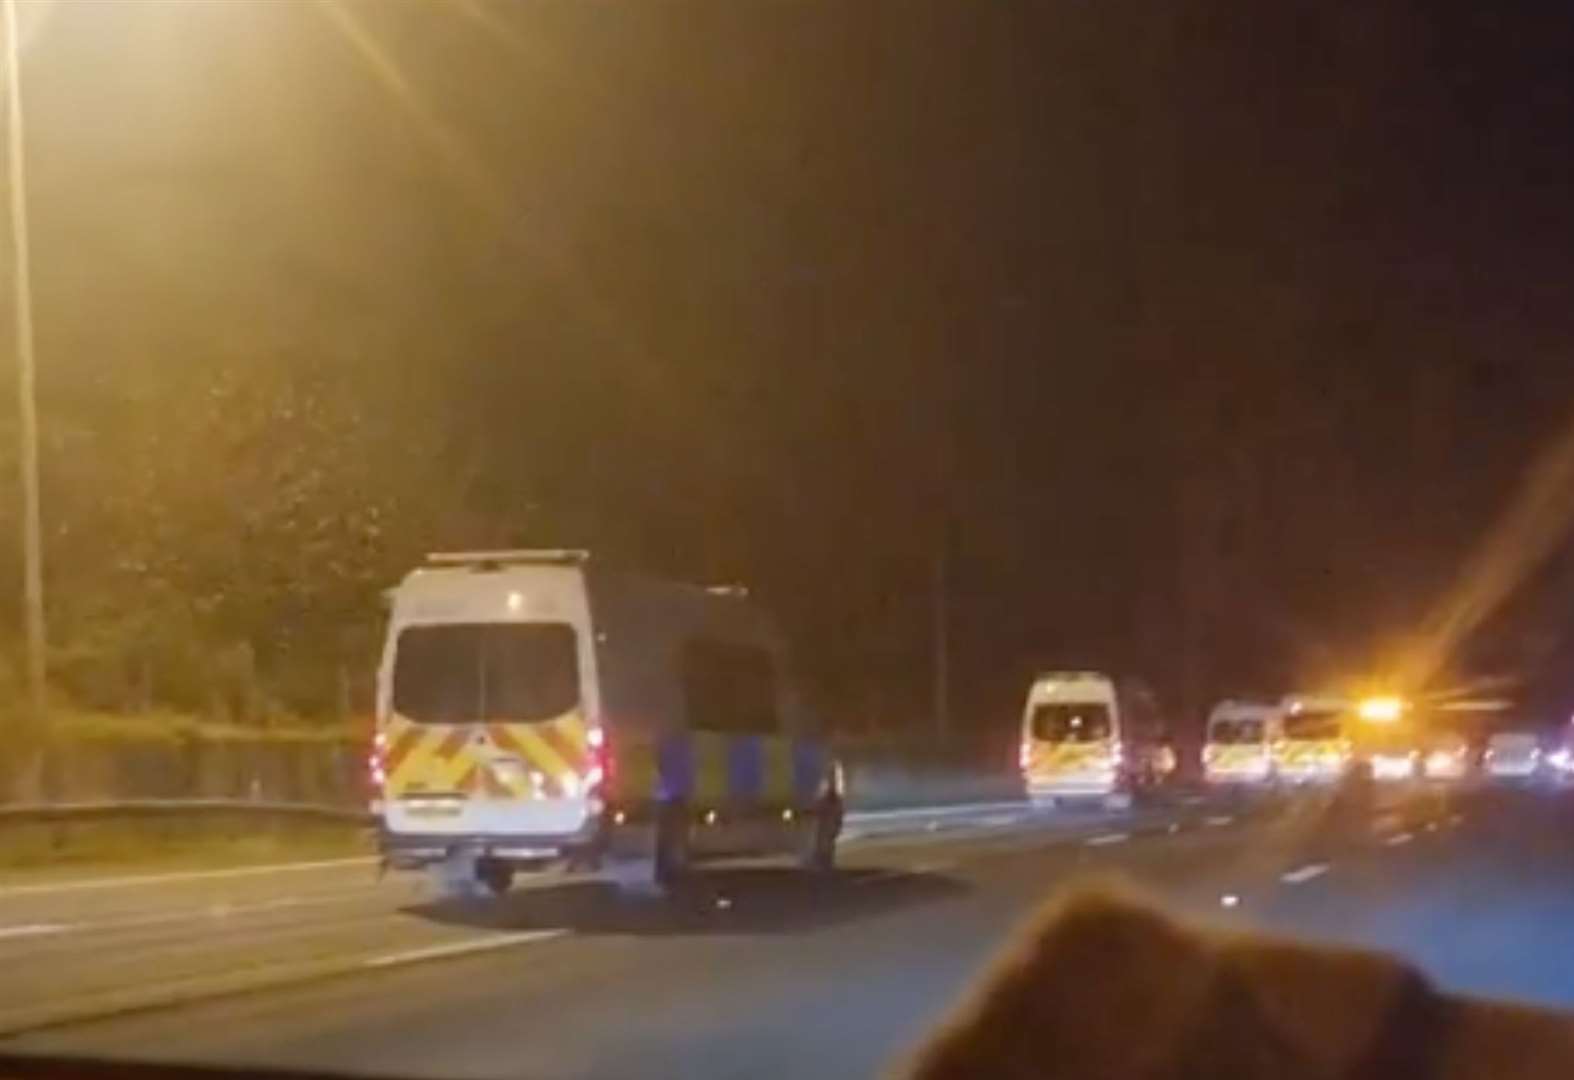 Mystery of huge police convoy solved